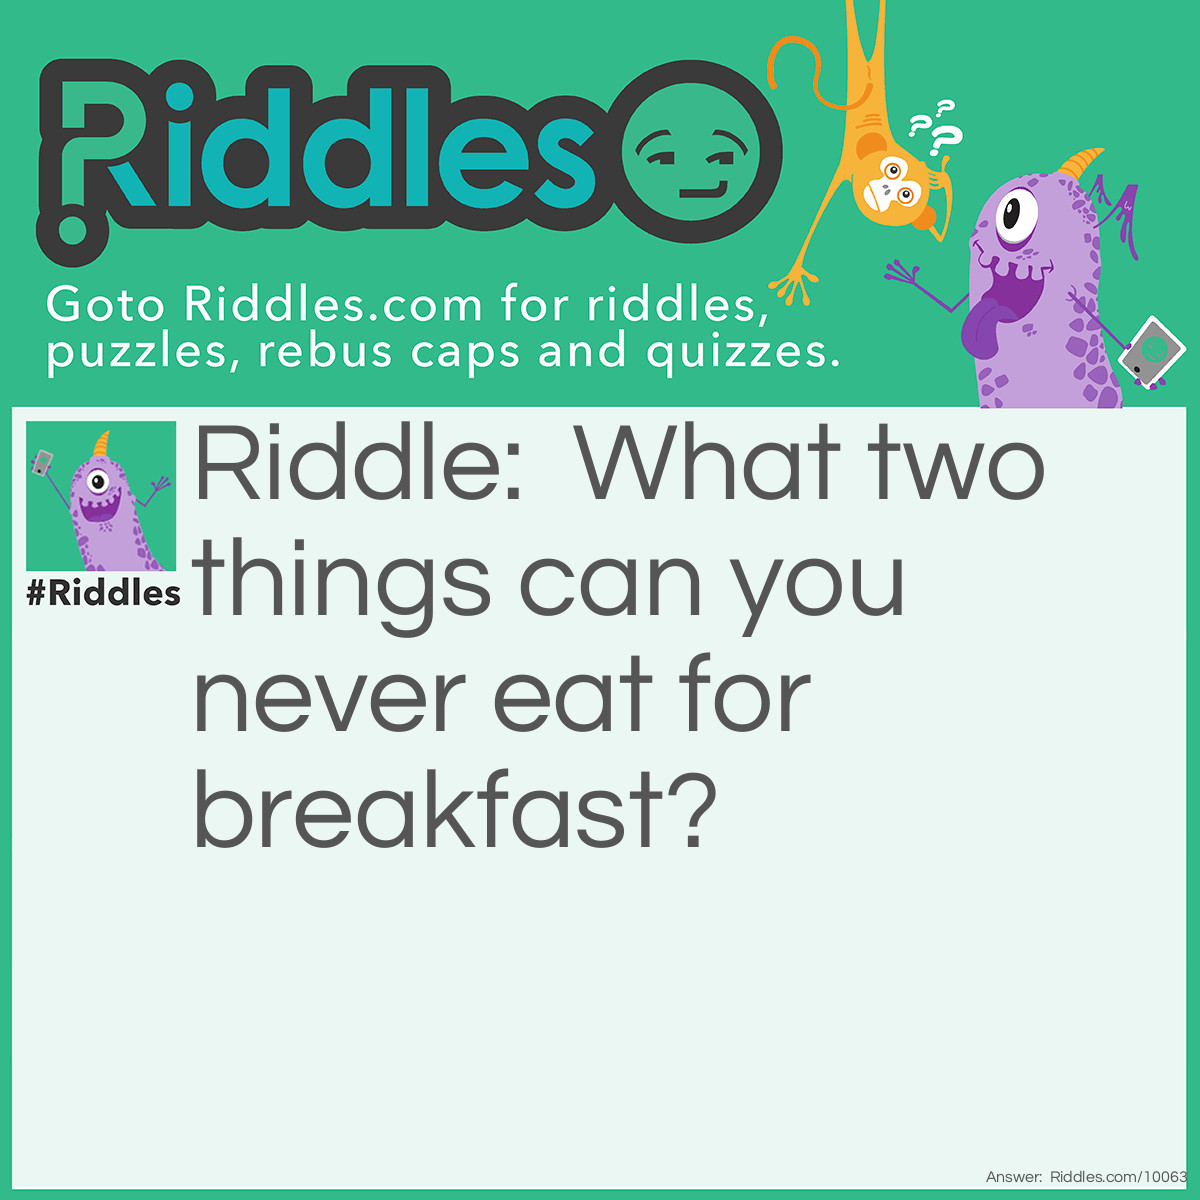 Riddle: What two things can you never eat for breakfast? Answer: Lunch and Dinner